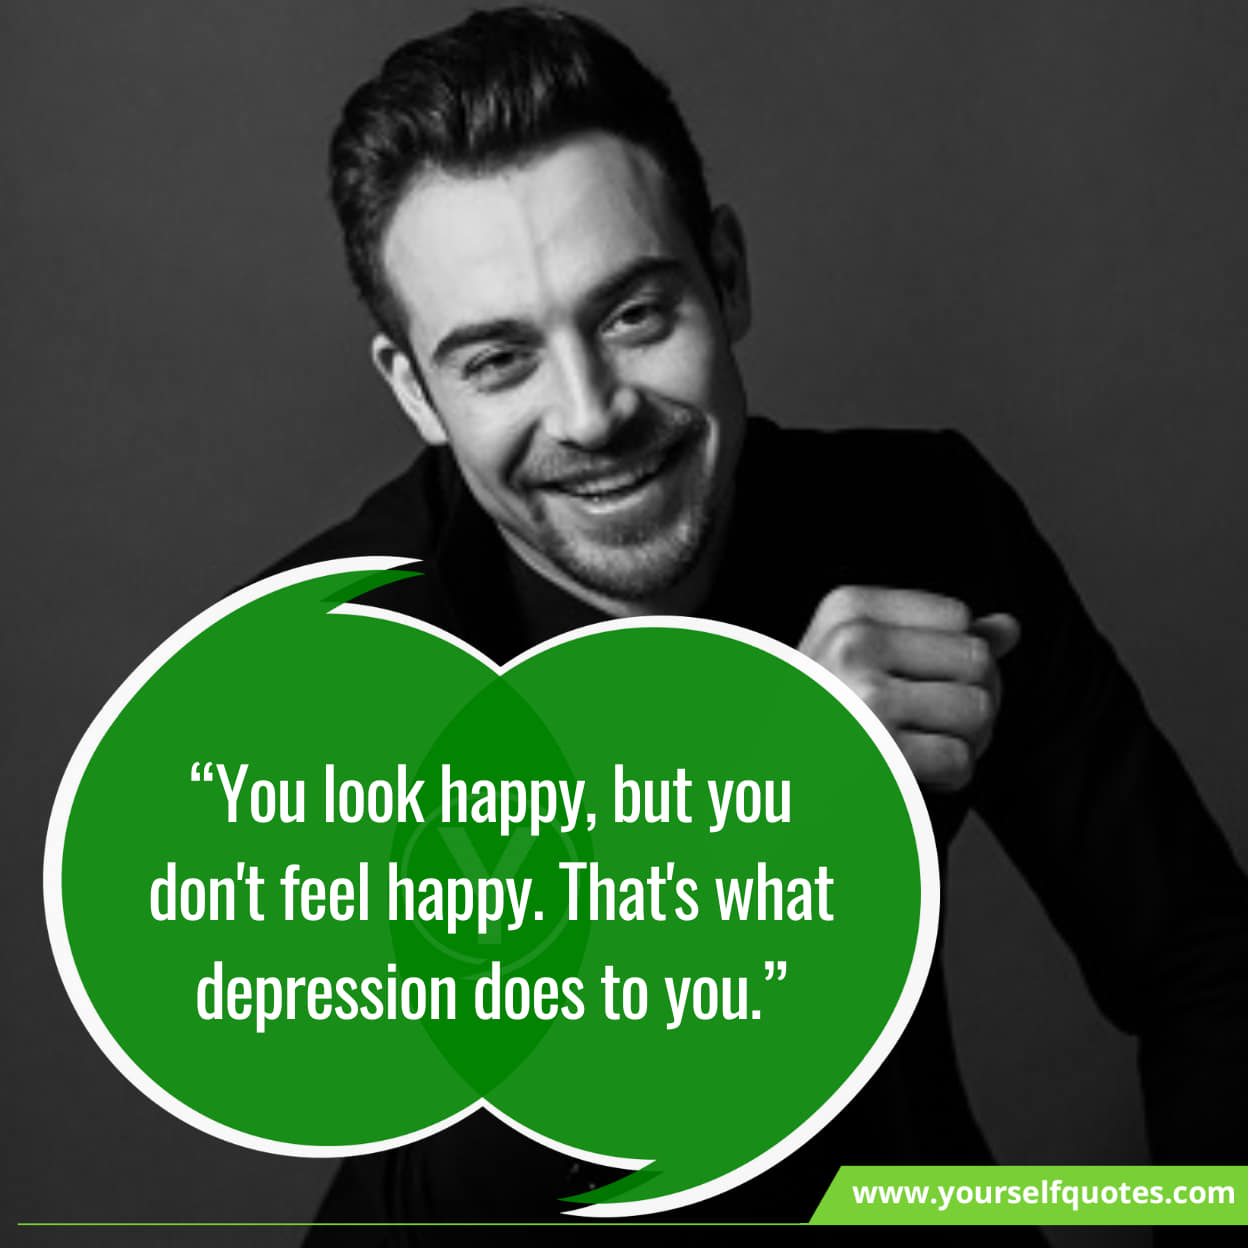 Latest Depression Quotes For Life To Handle